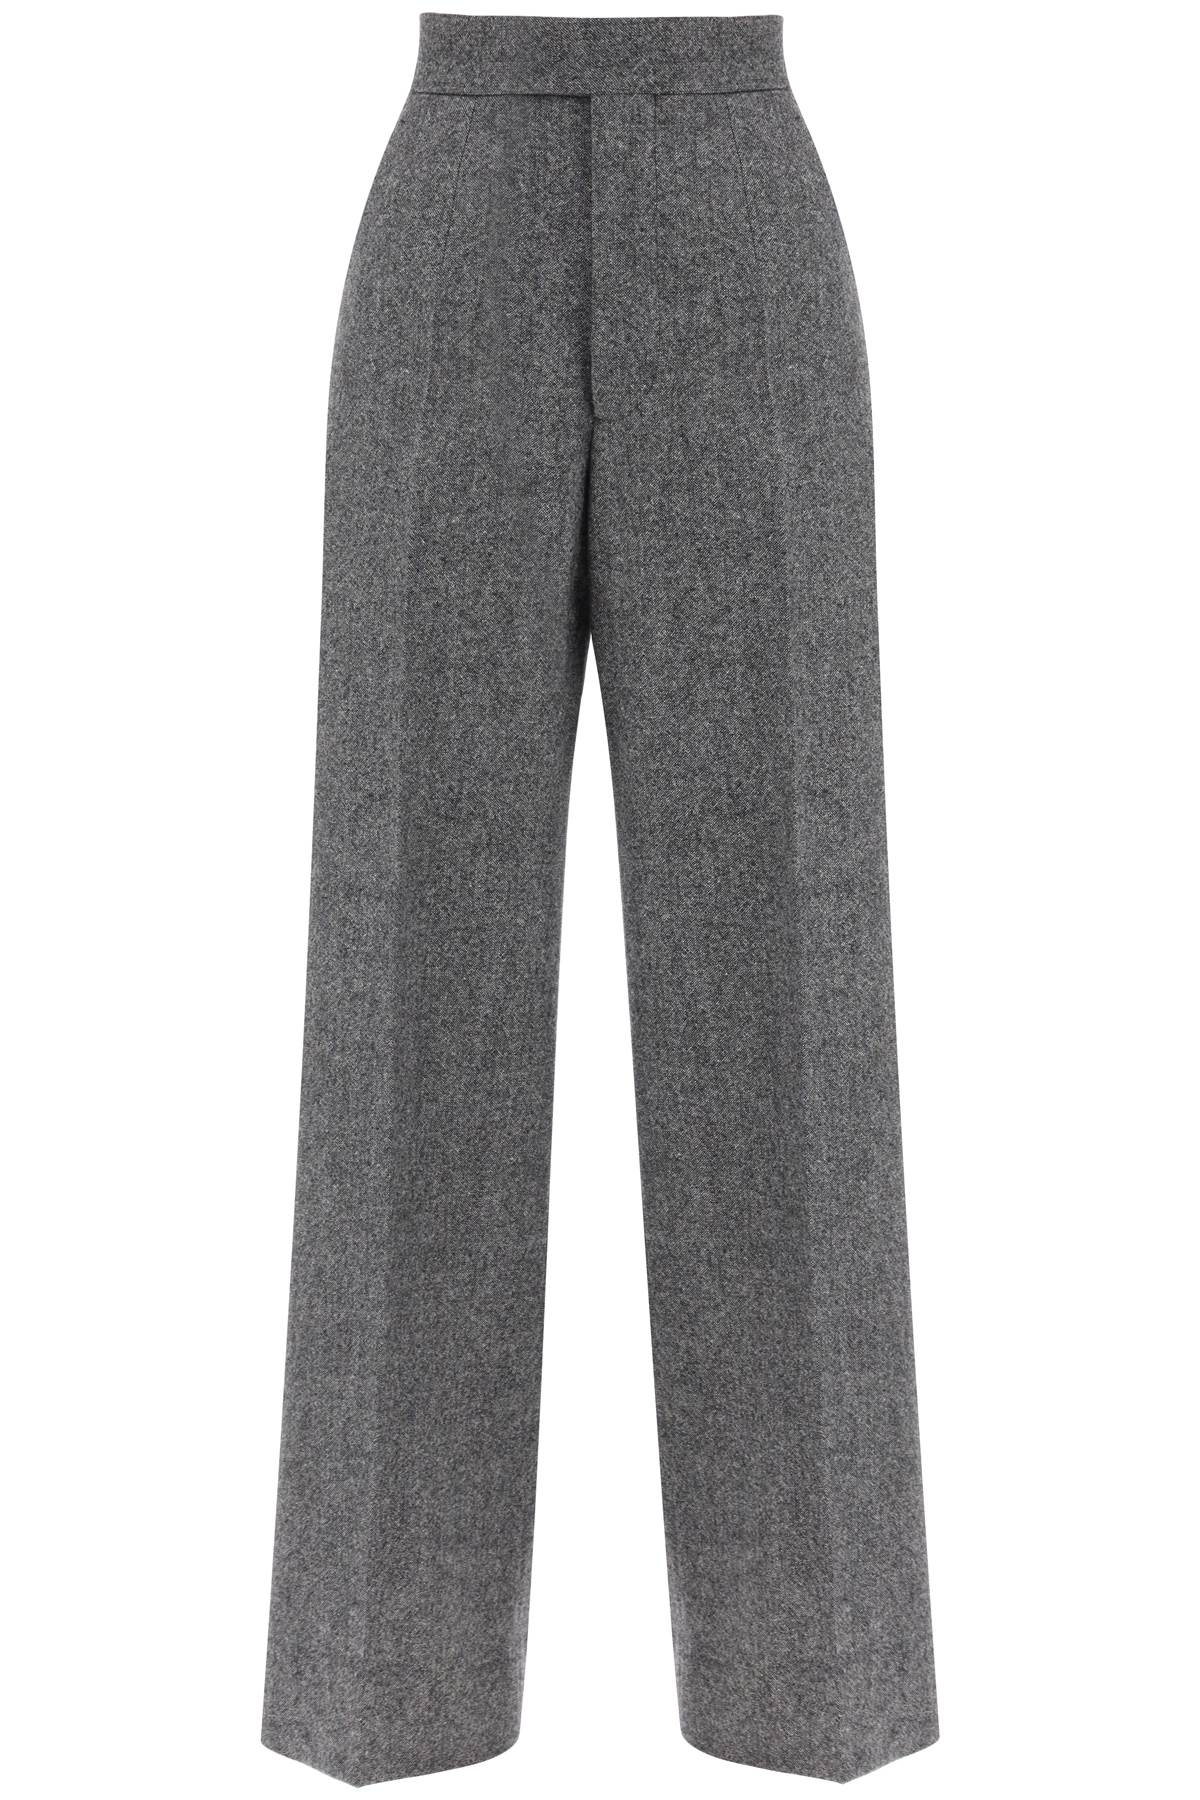 VIVIENNE WESTWOOD High-Waisted Donegal Tweed Trousers for Women - FW23